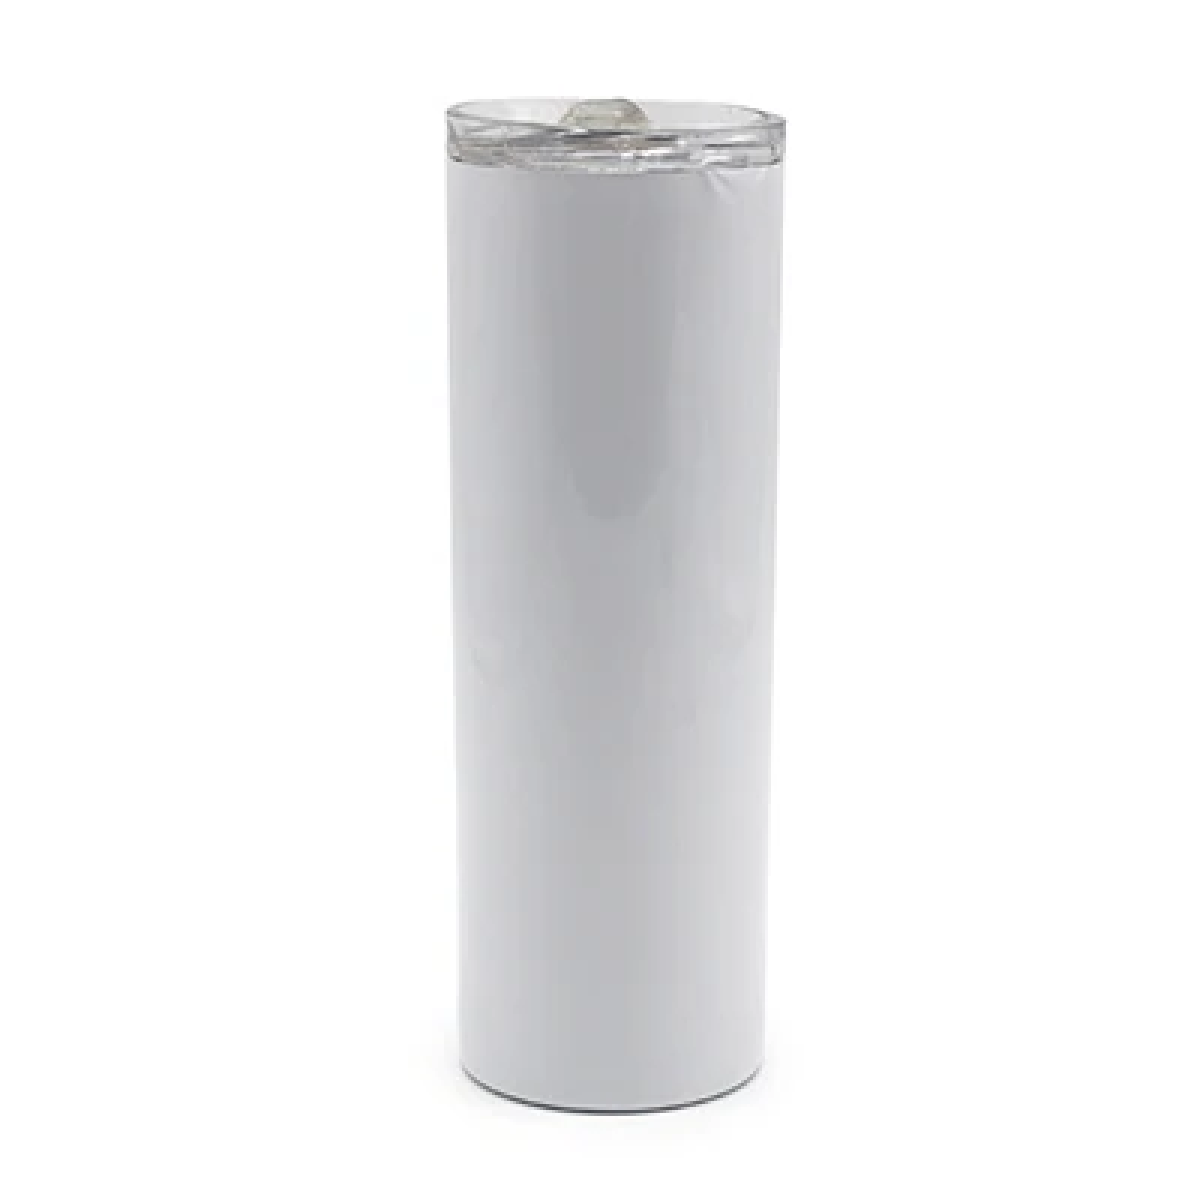 White Tumbler with stainless steel interior